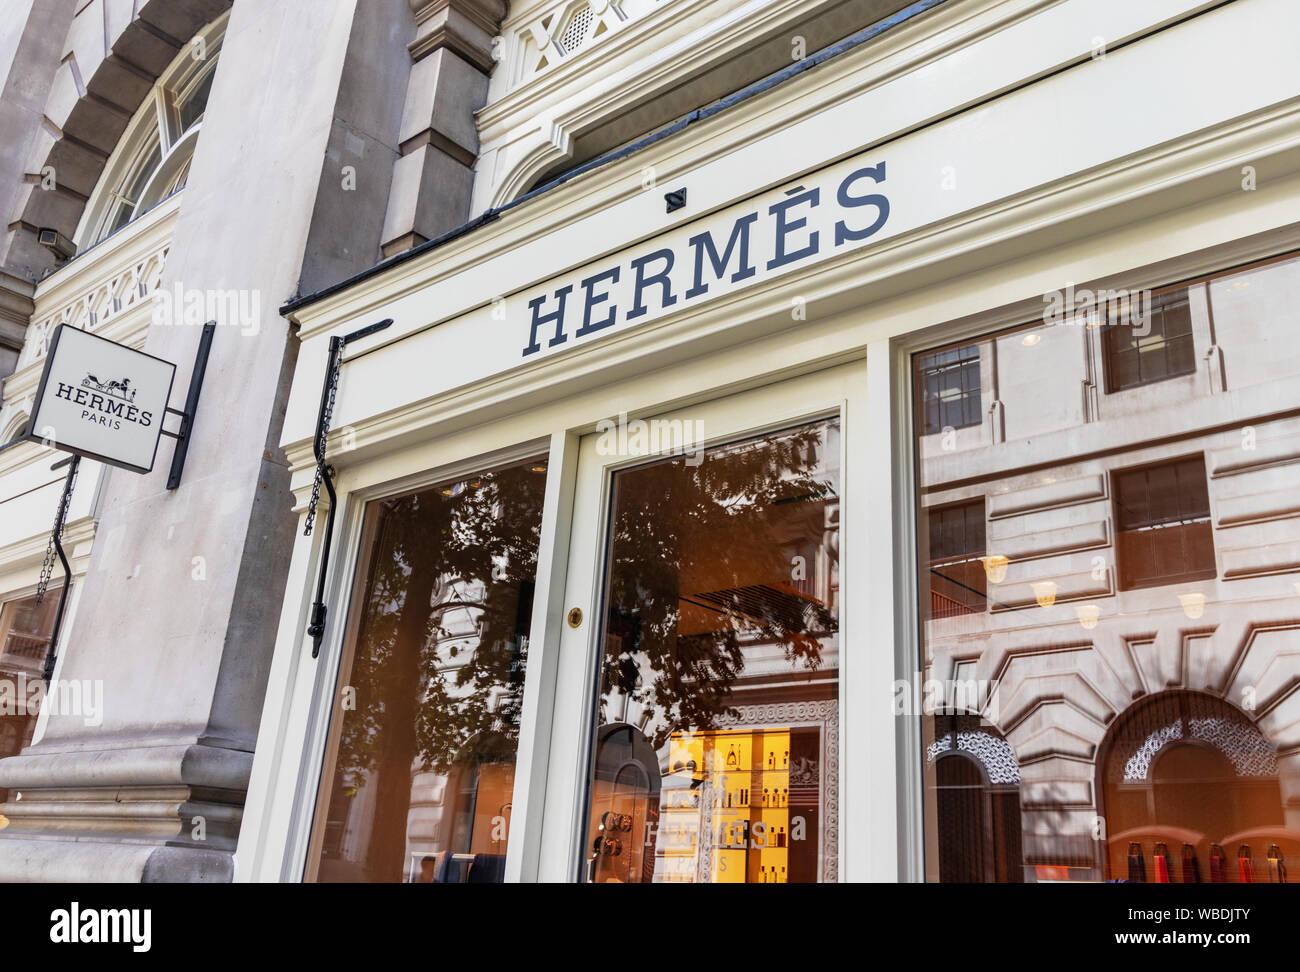 London / UK, August 21st 2019 - Hermes shop front in the Royal Exchange, in Bank.  Hermes is a high-end retailer carrying the luxury brand's apparel, Stock Photo